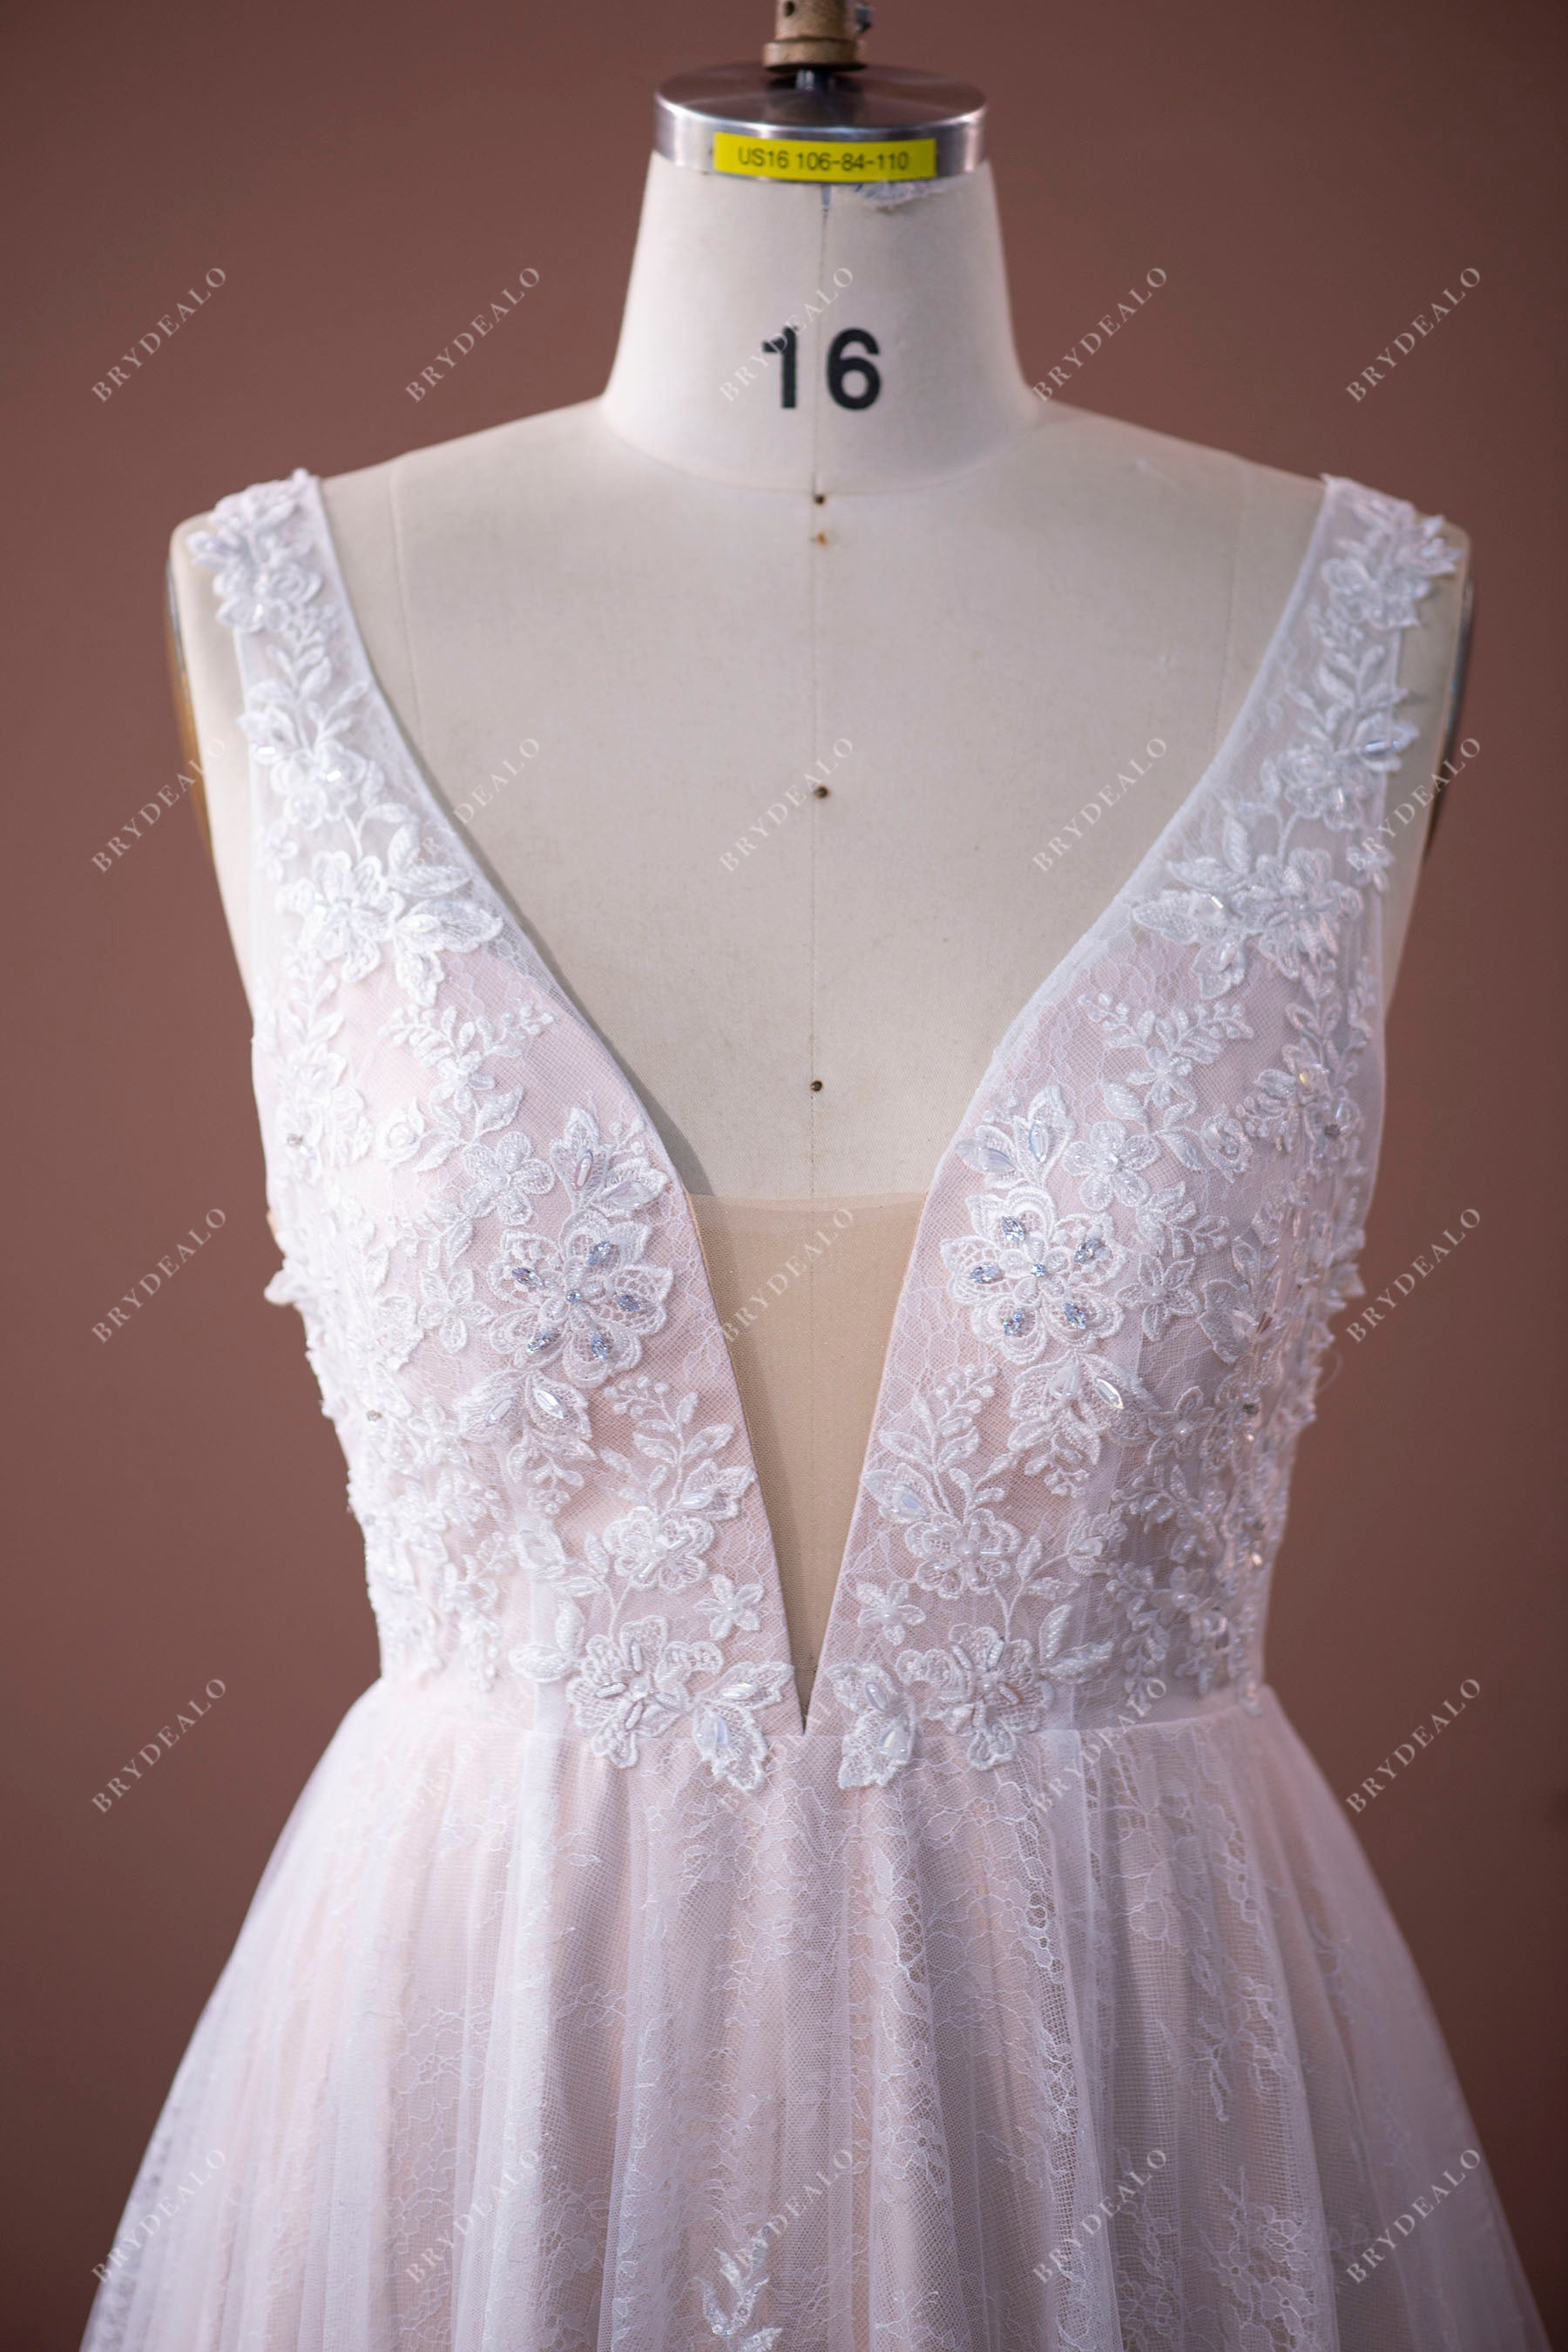 plunging neck beaded floral lace wedding gown